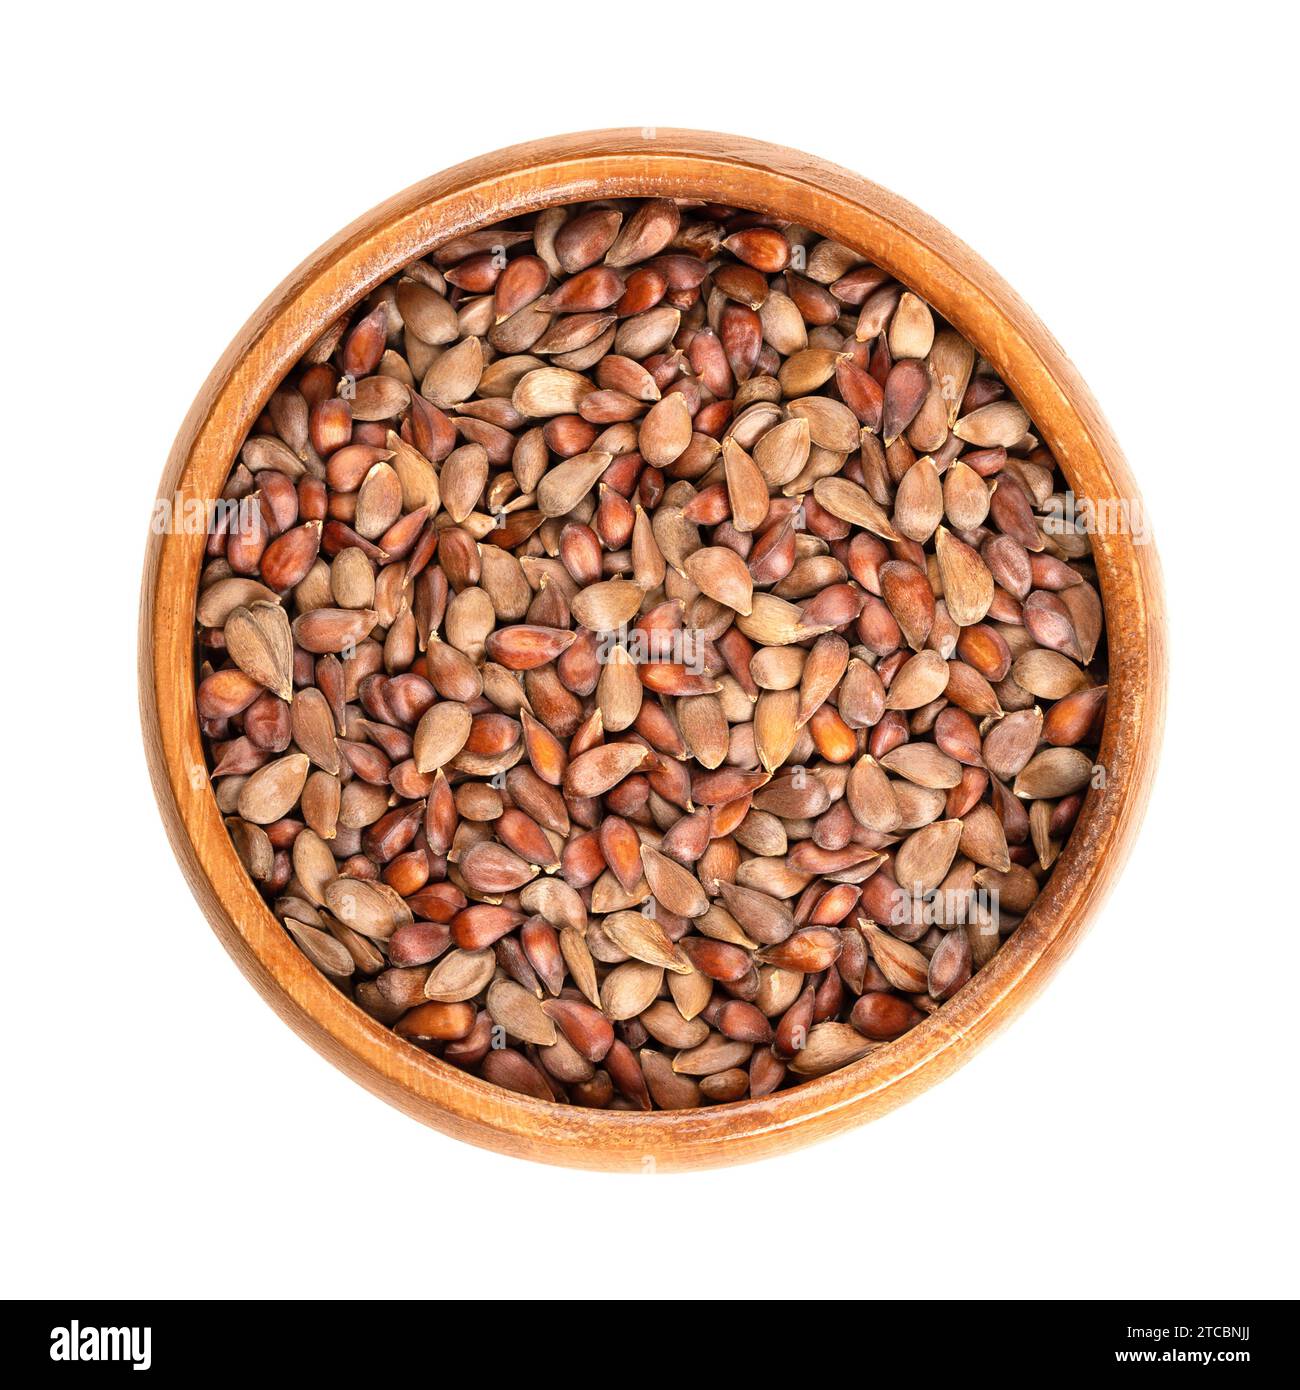 Dried apple seeds in a wooden bowl. Brown seeds of apples from the genus Malus. Should not be eaten because of containing amygdalin and cyanide. Stock Photo